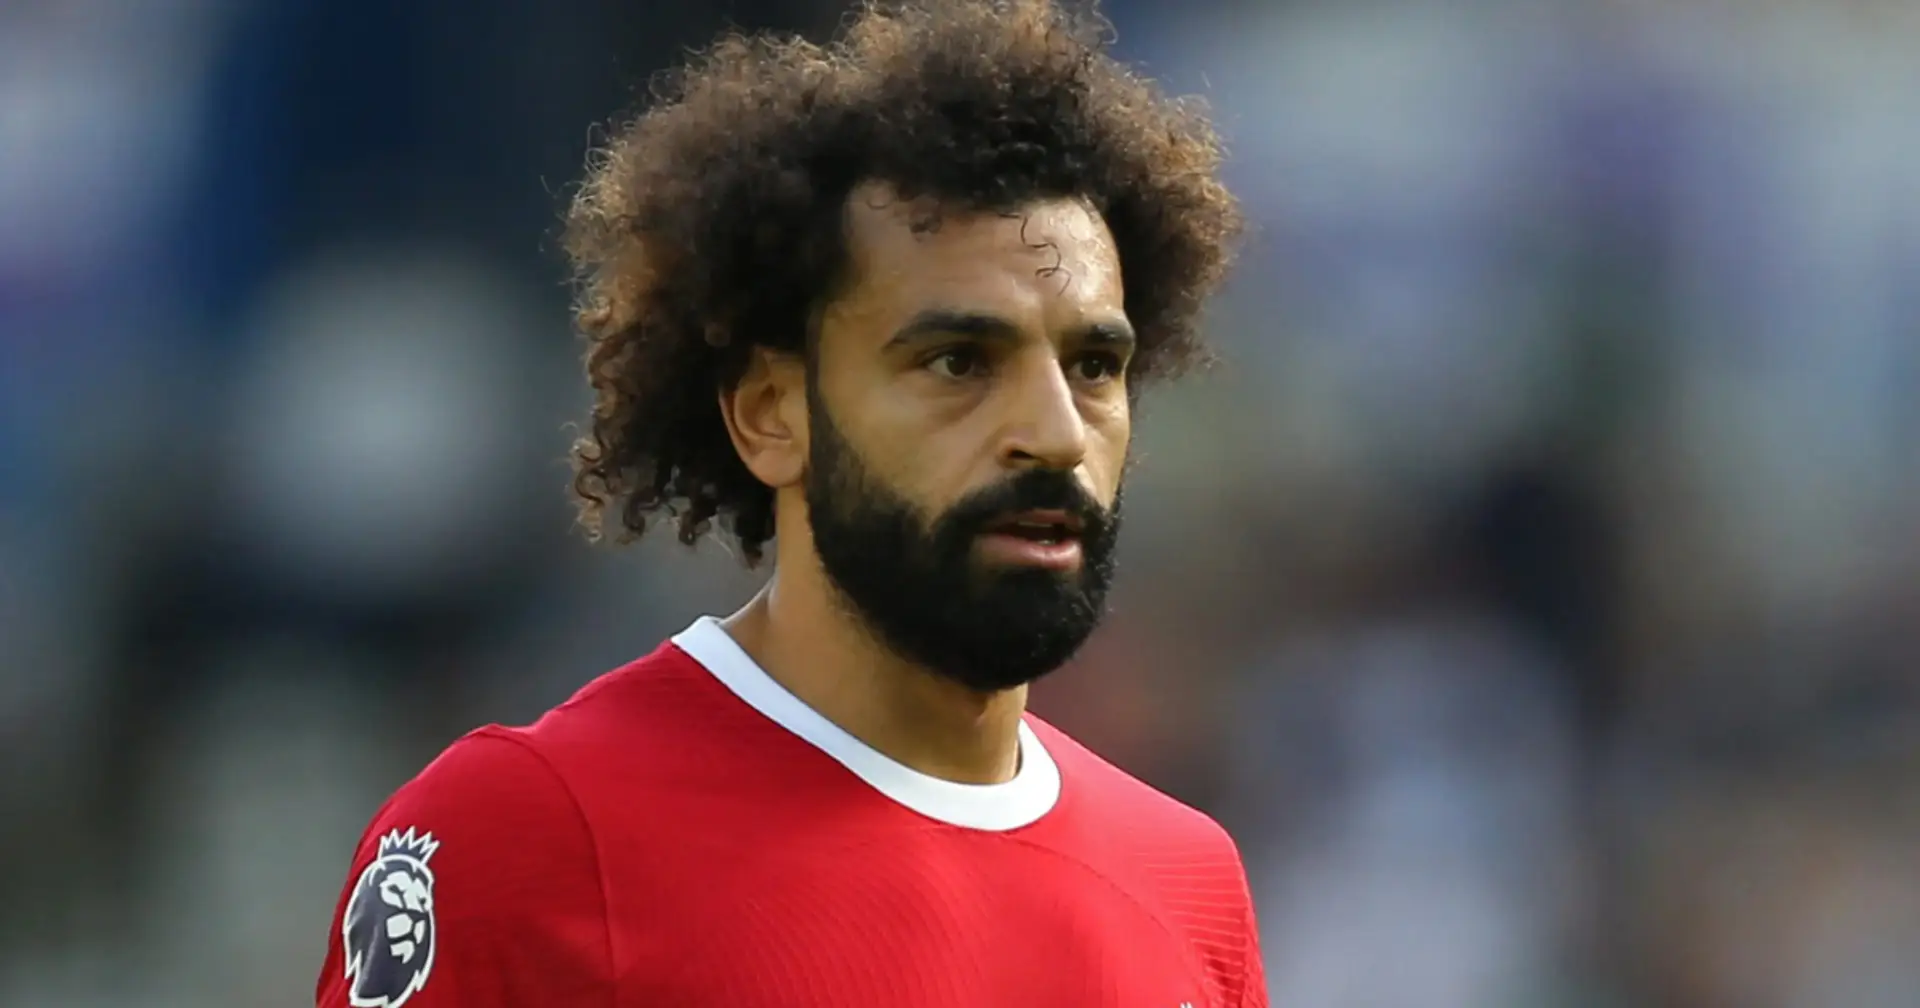 'You don’t know whether he’s happy': Joe Cole asks questions over Mo Salah futre